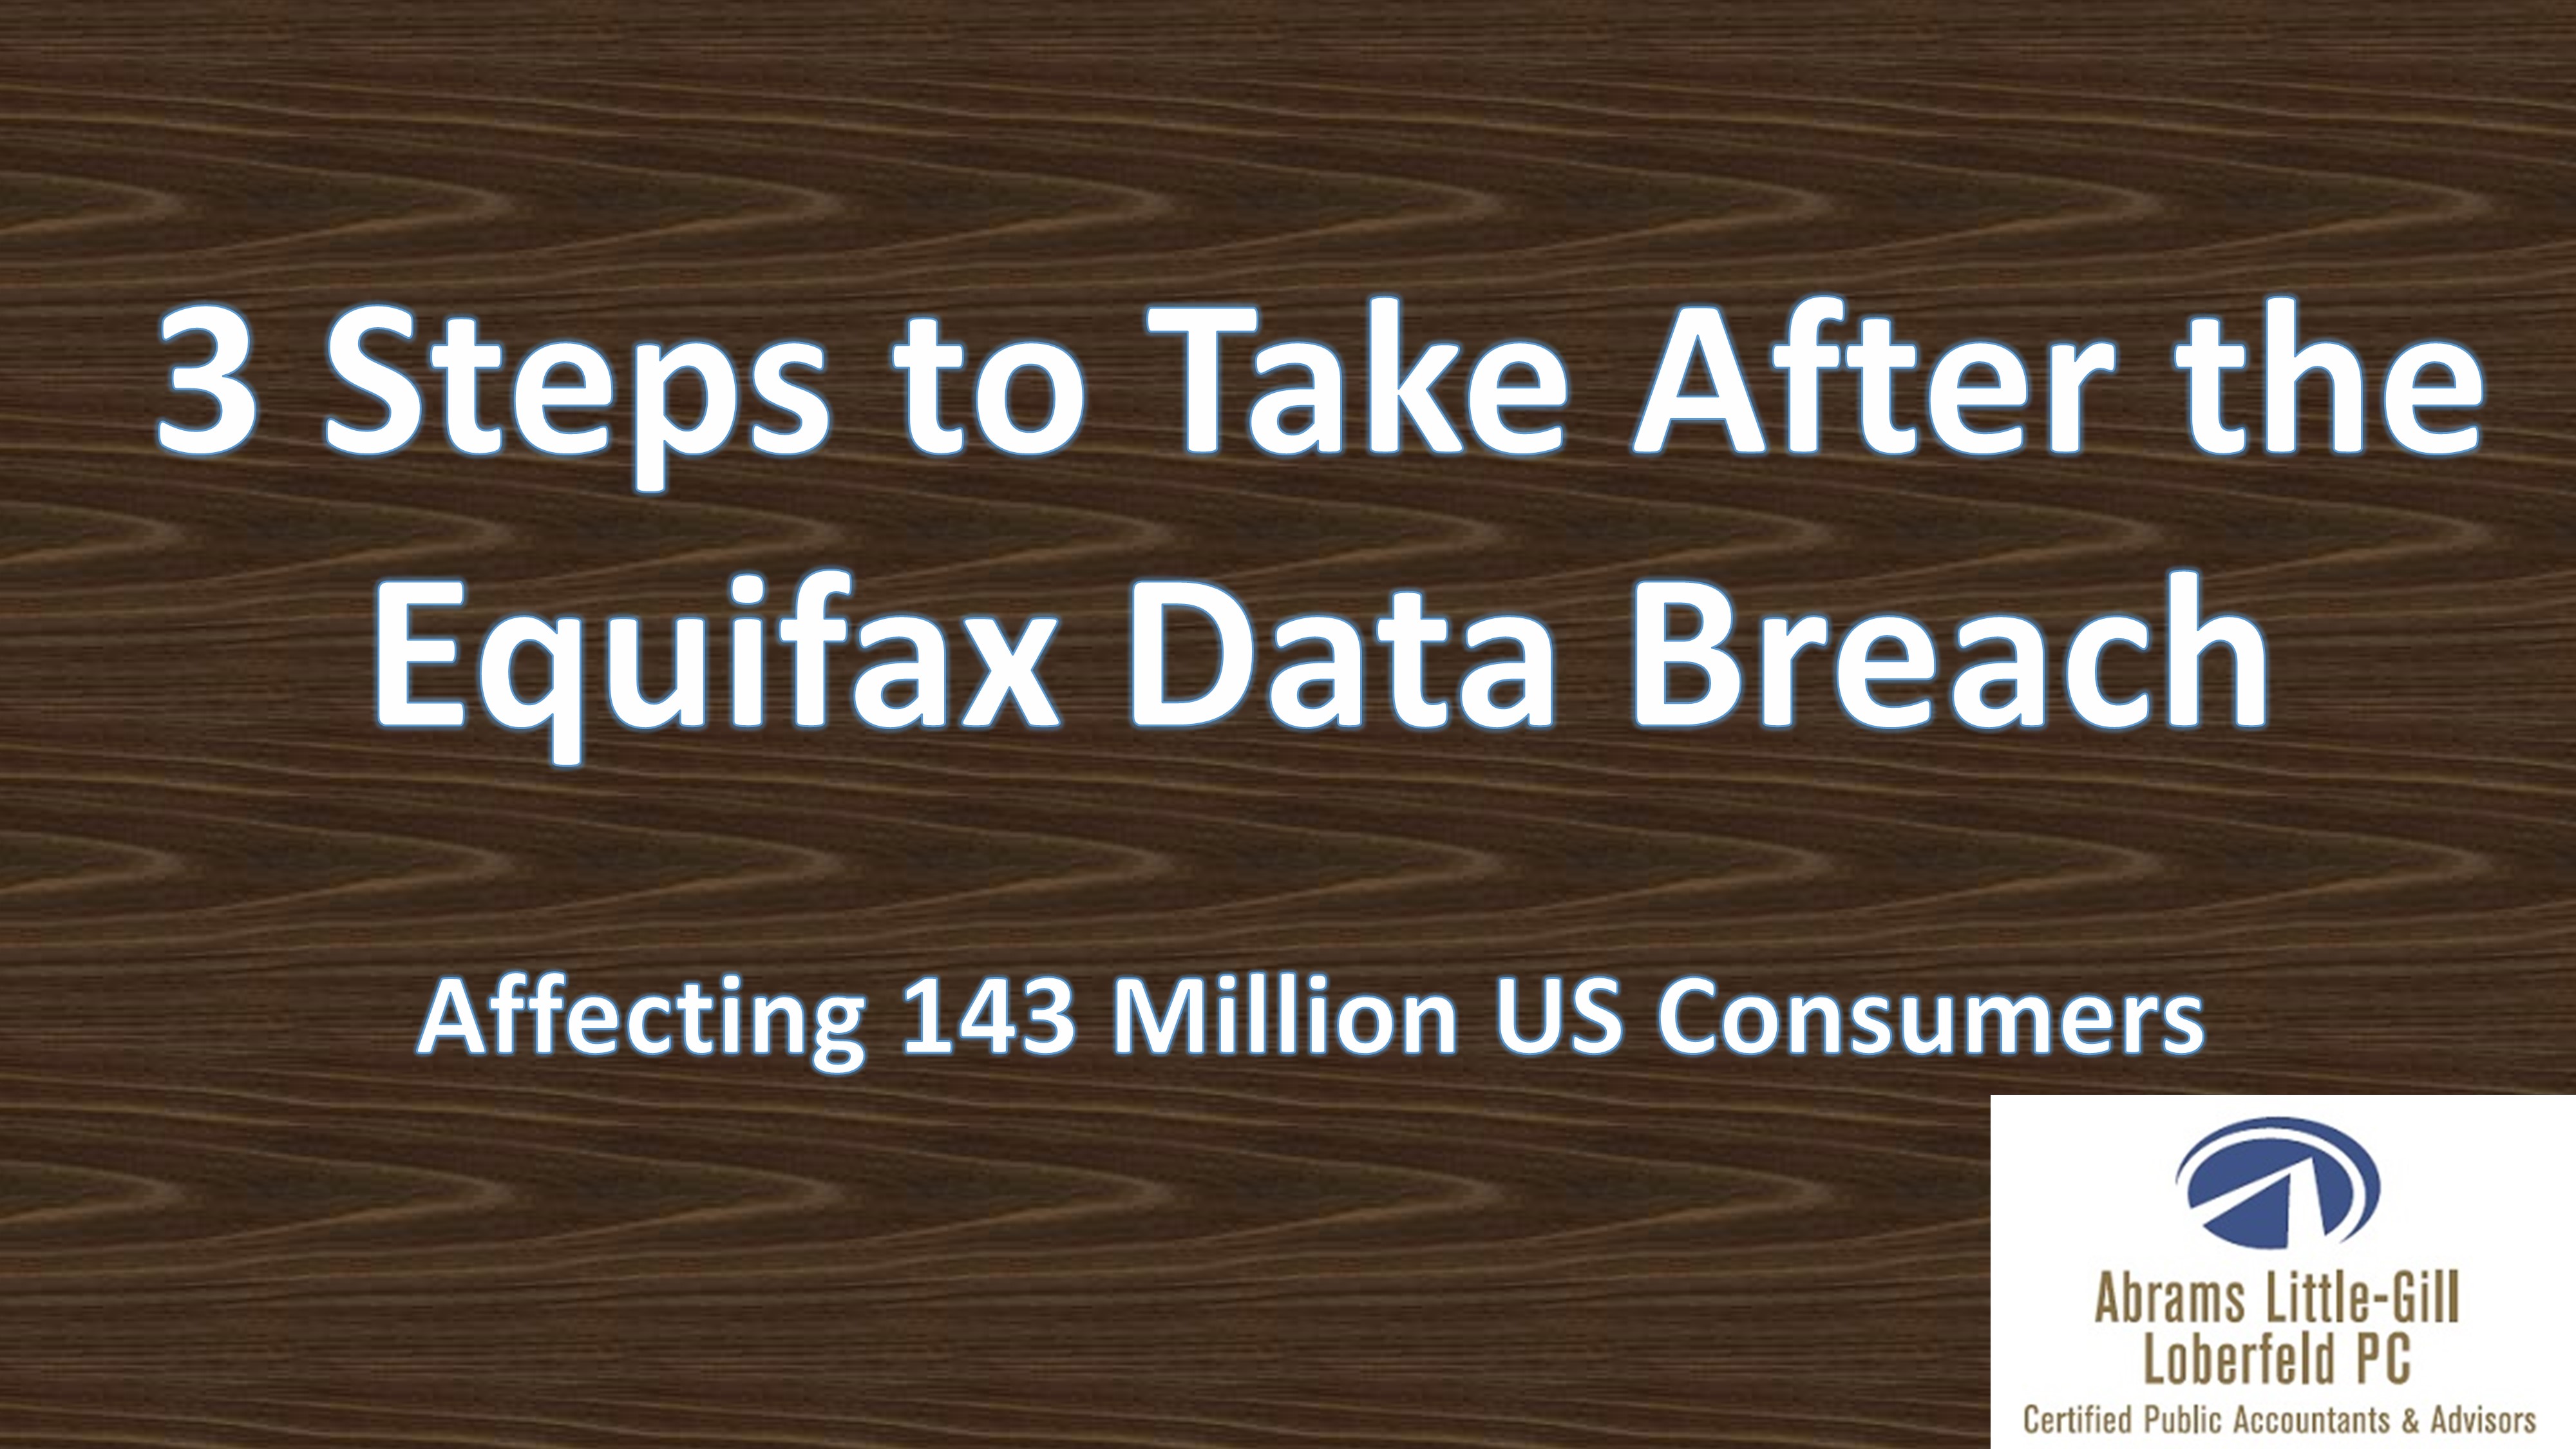 3 Steps to Take After the Equifax Data Breach – Affecting 143 Million US Consumers